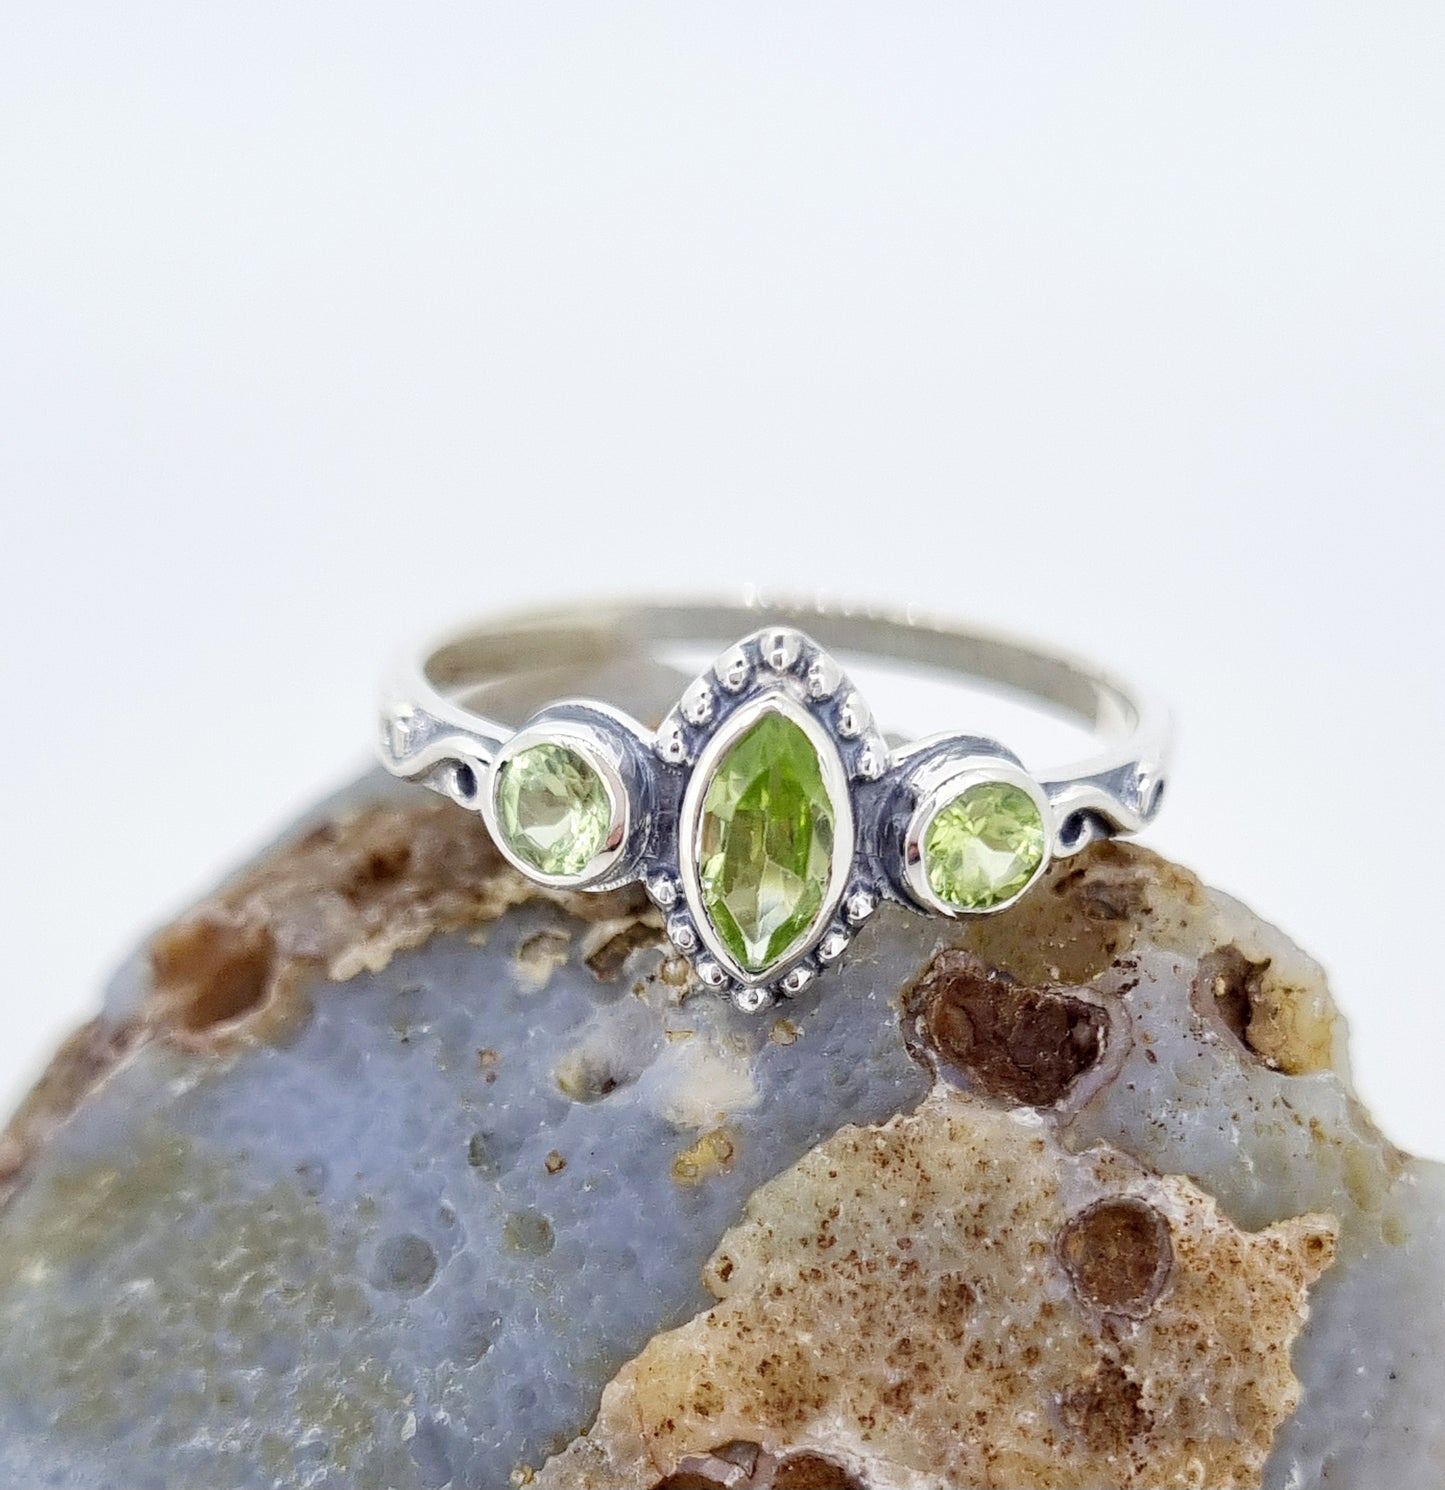 Peridot Gems In Ornate 925 Sterling Silver Band Ring